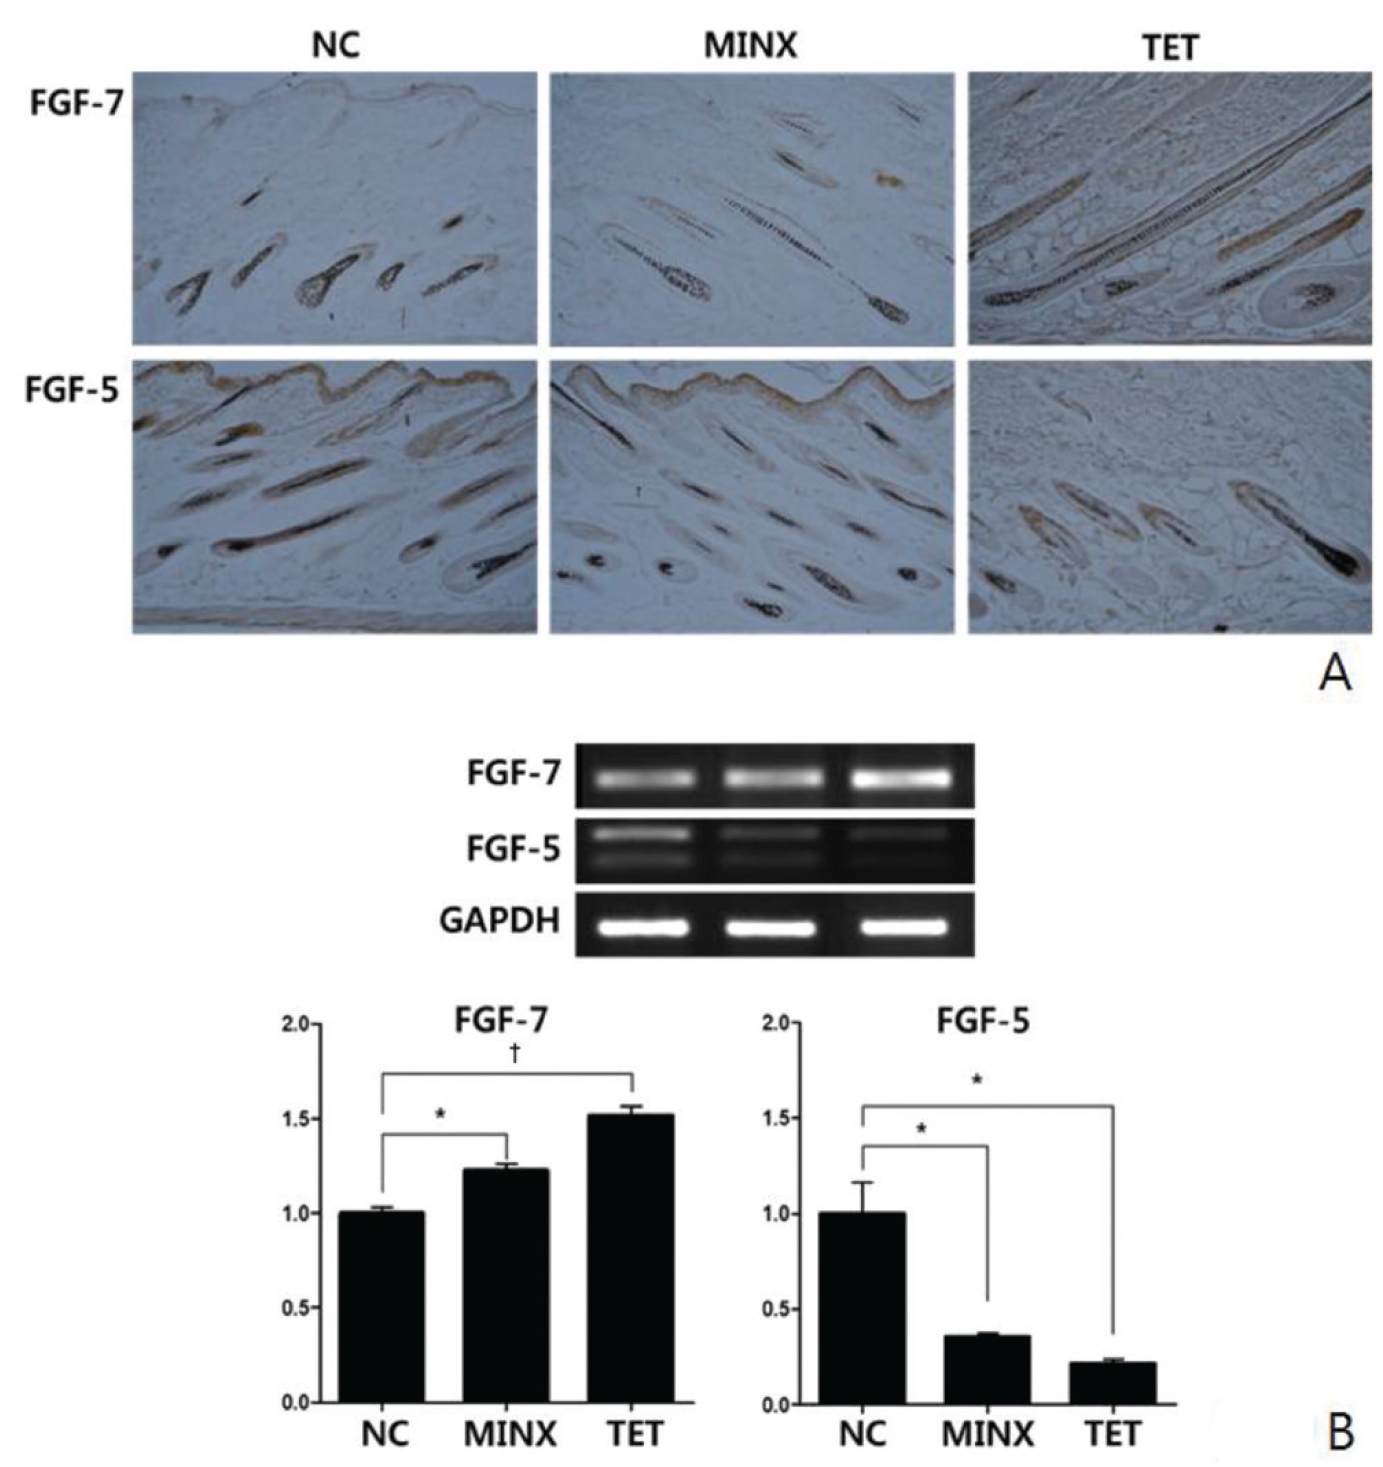 Induction by TET of growth factors that play important roles in hair follicle development.